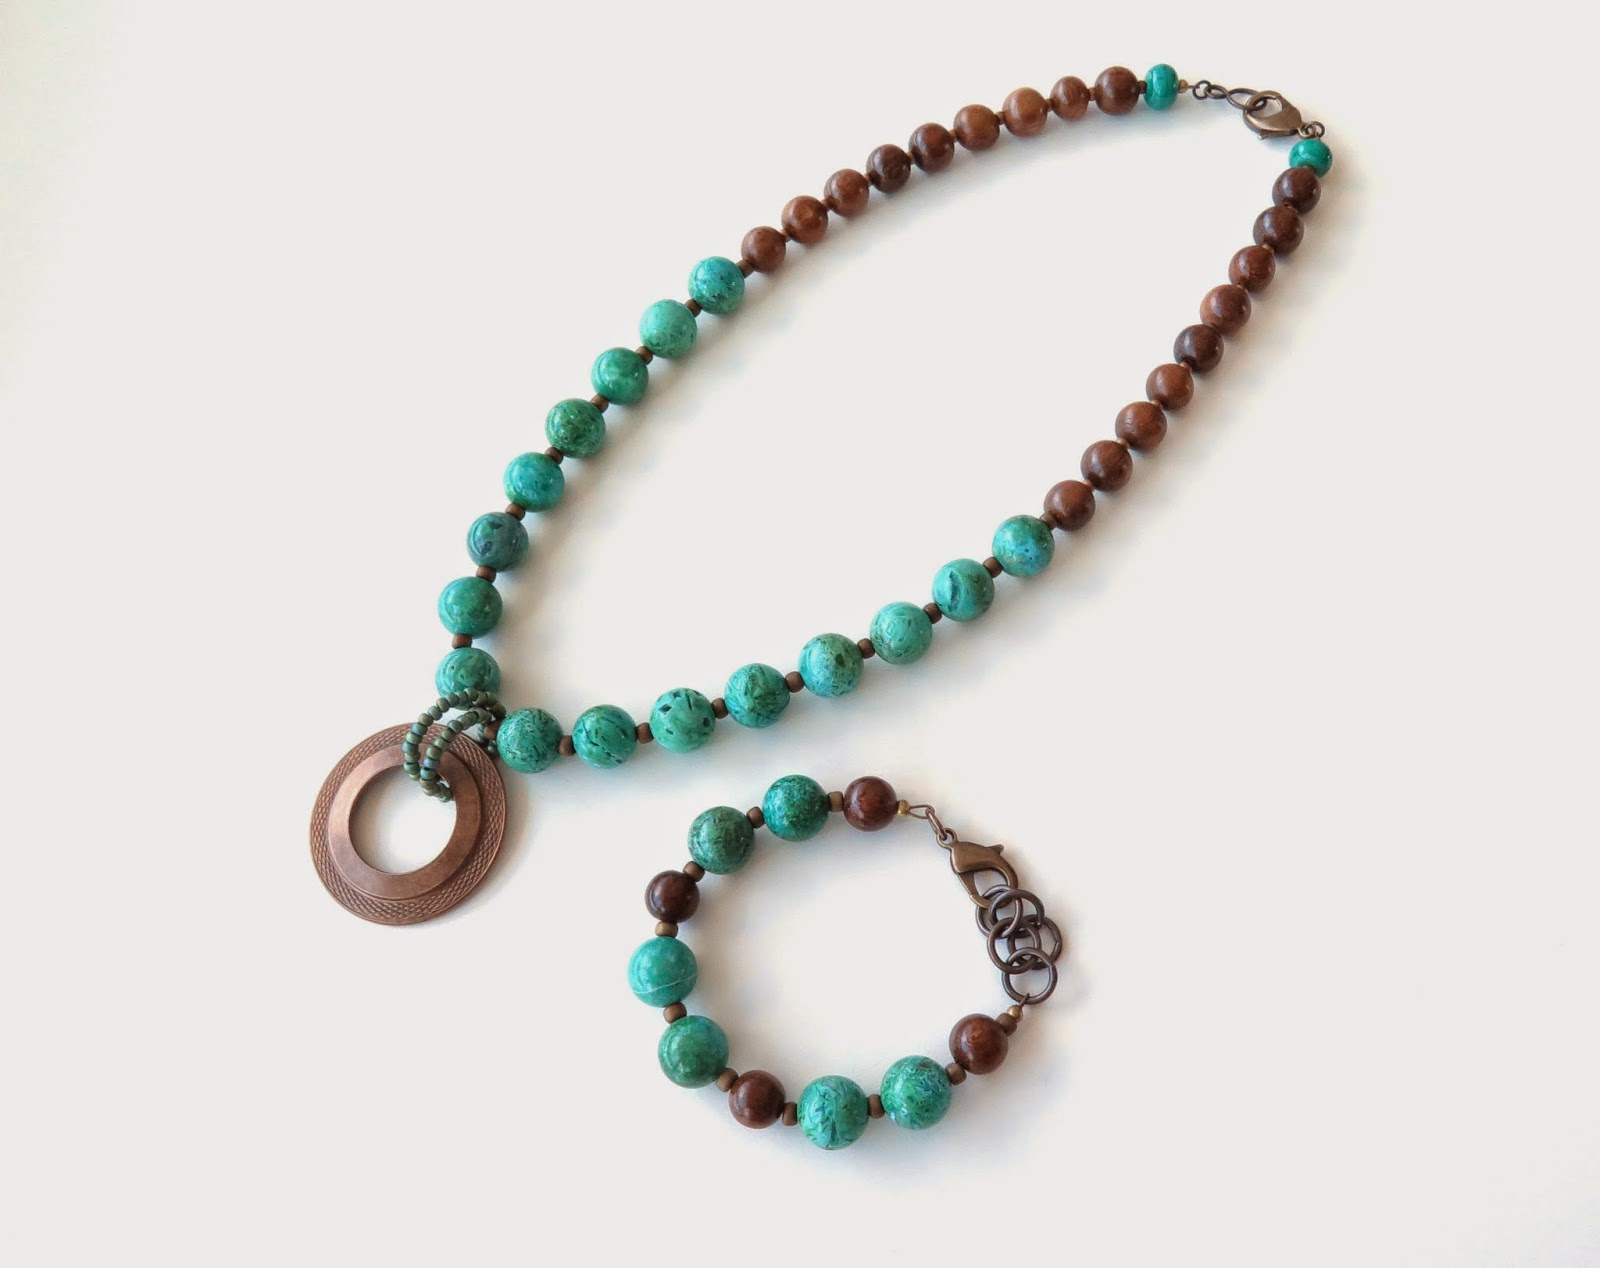 http://sashaandmax.bigcartel.com/product/alia-green-agate-and-wood-necklace